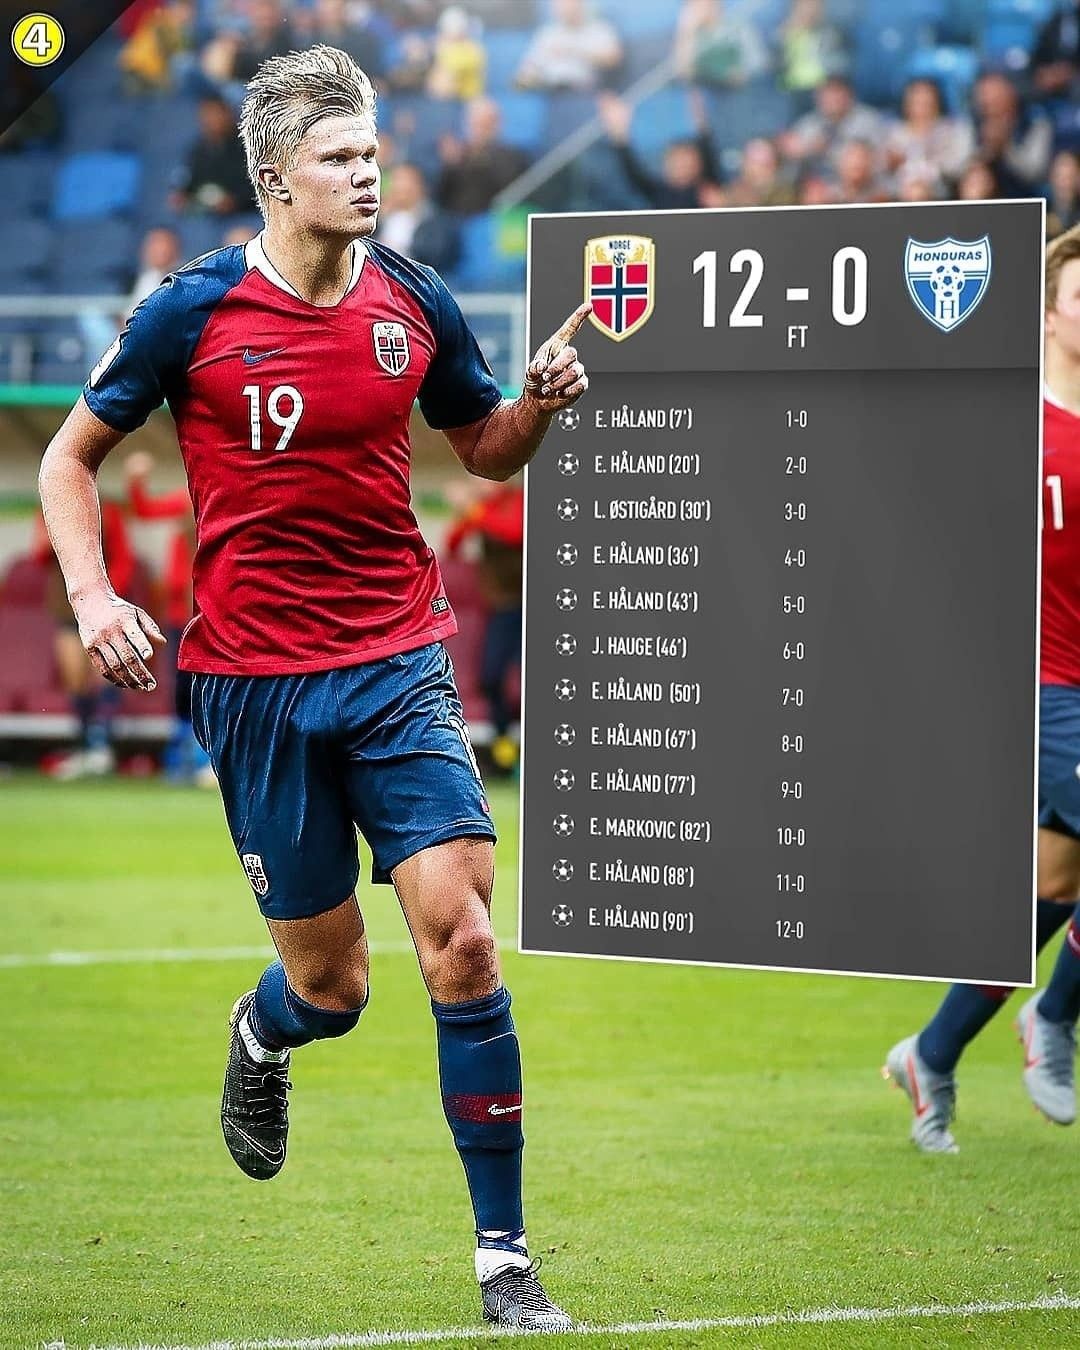 Erling Haaland scored 9 Goals for Norway at the U20 World Cup